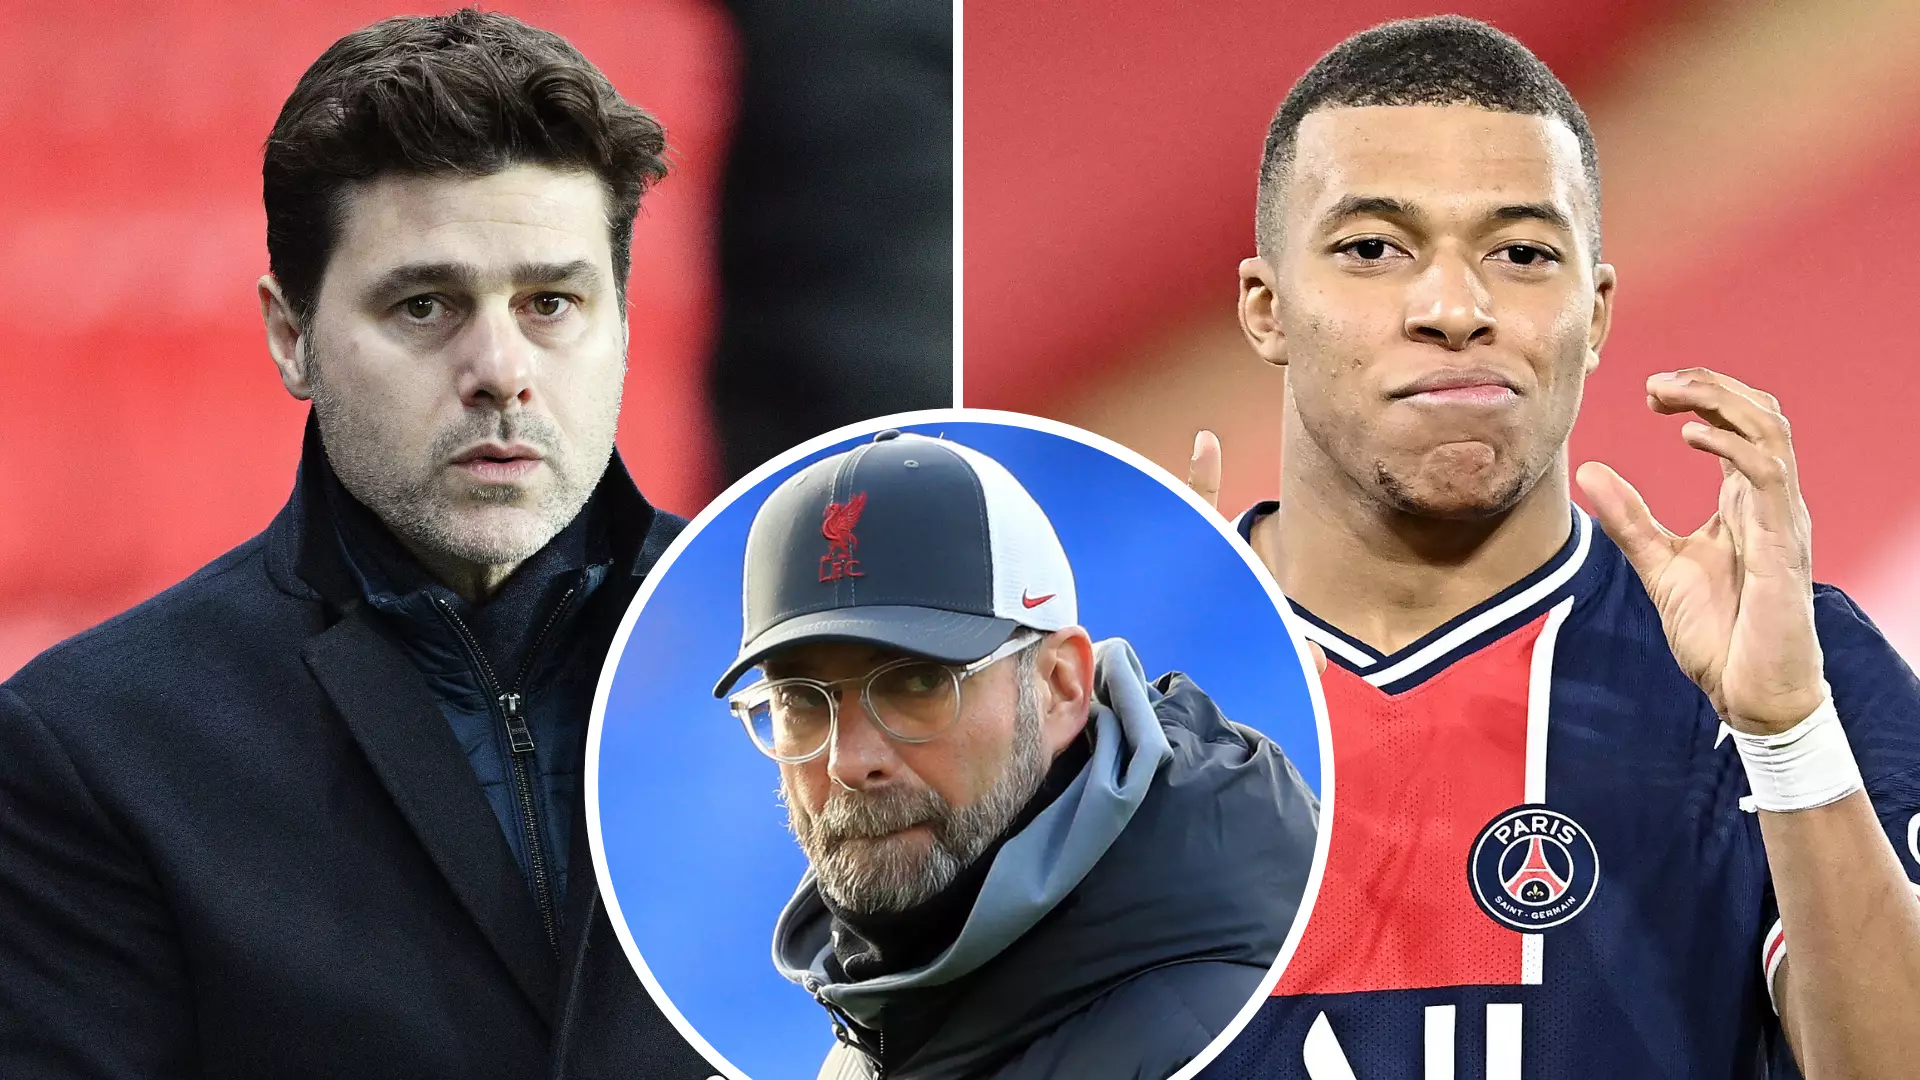 Mauricio Pochettino’s 'Deal-Breaker' Reveals How Liverpool Could Sign Kylian Mbappe Next Summer